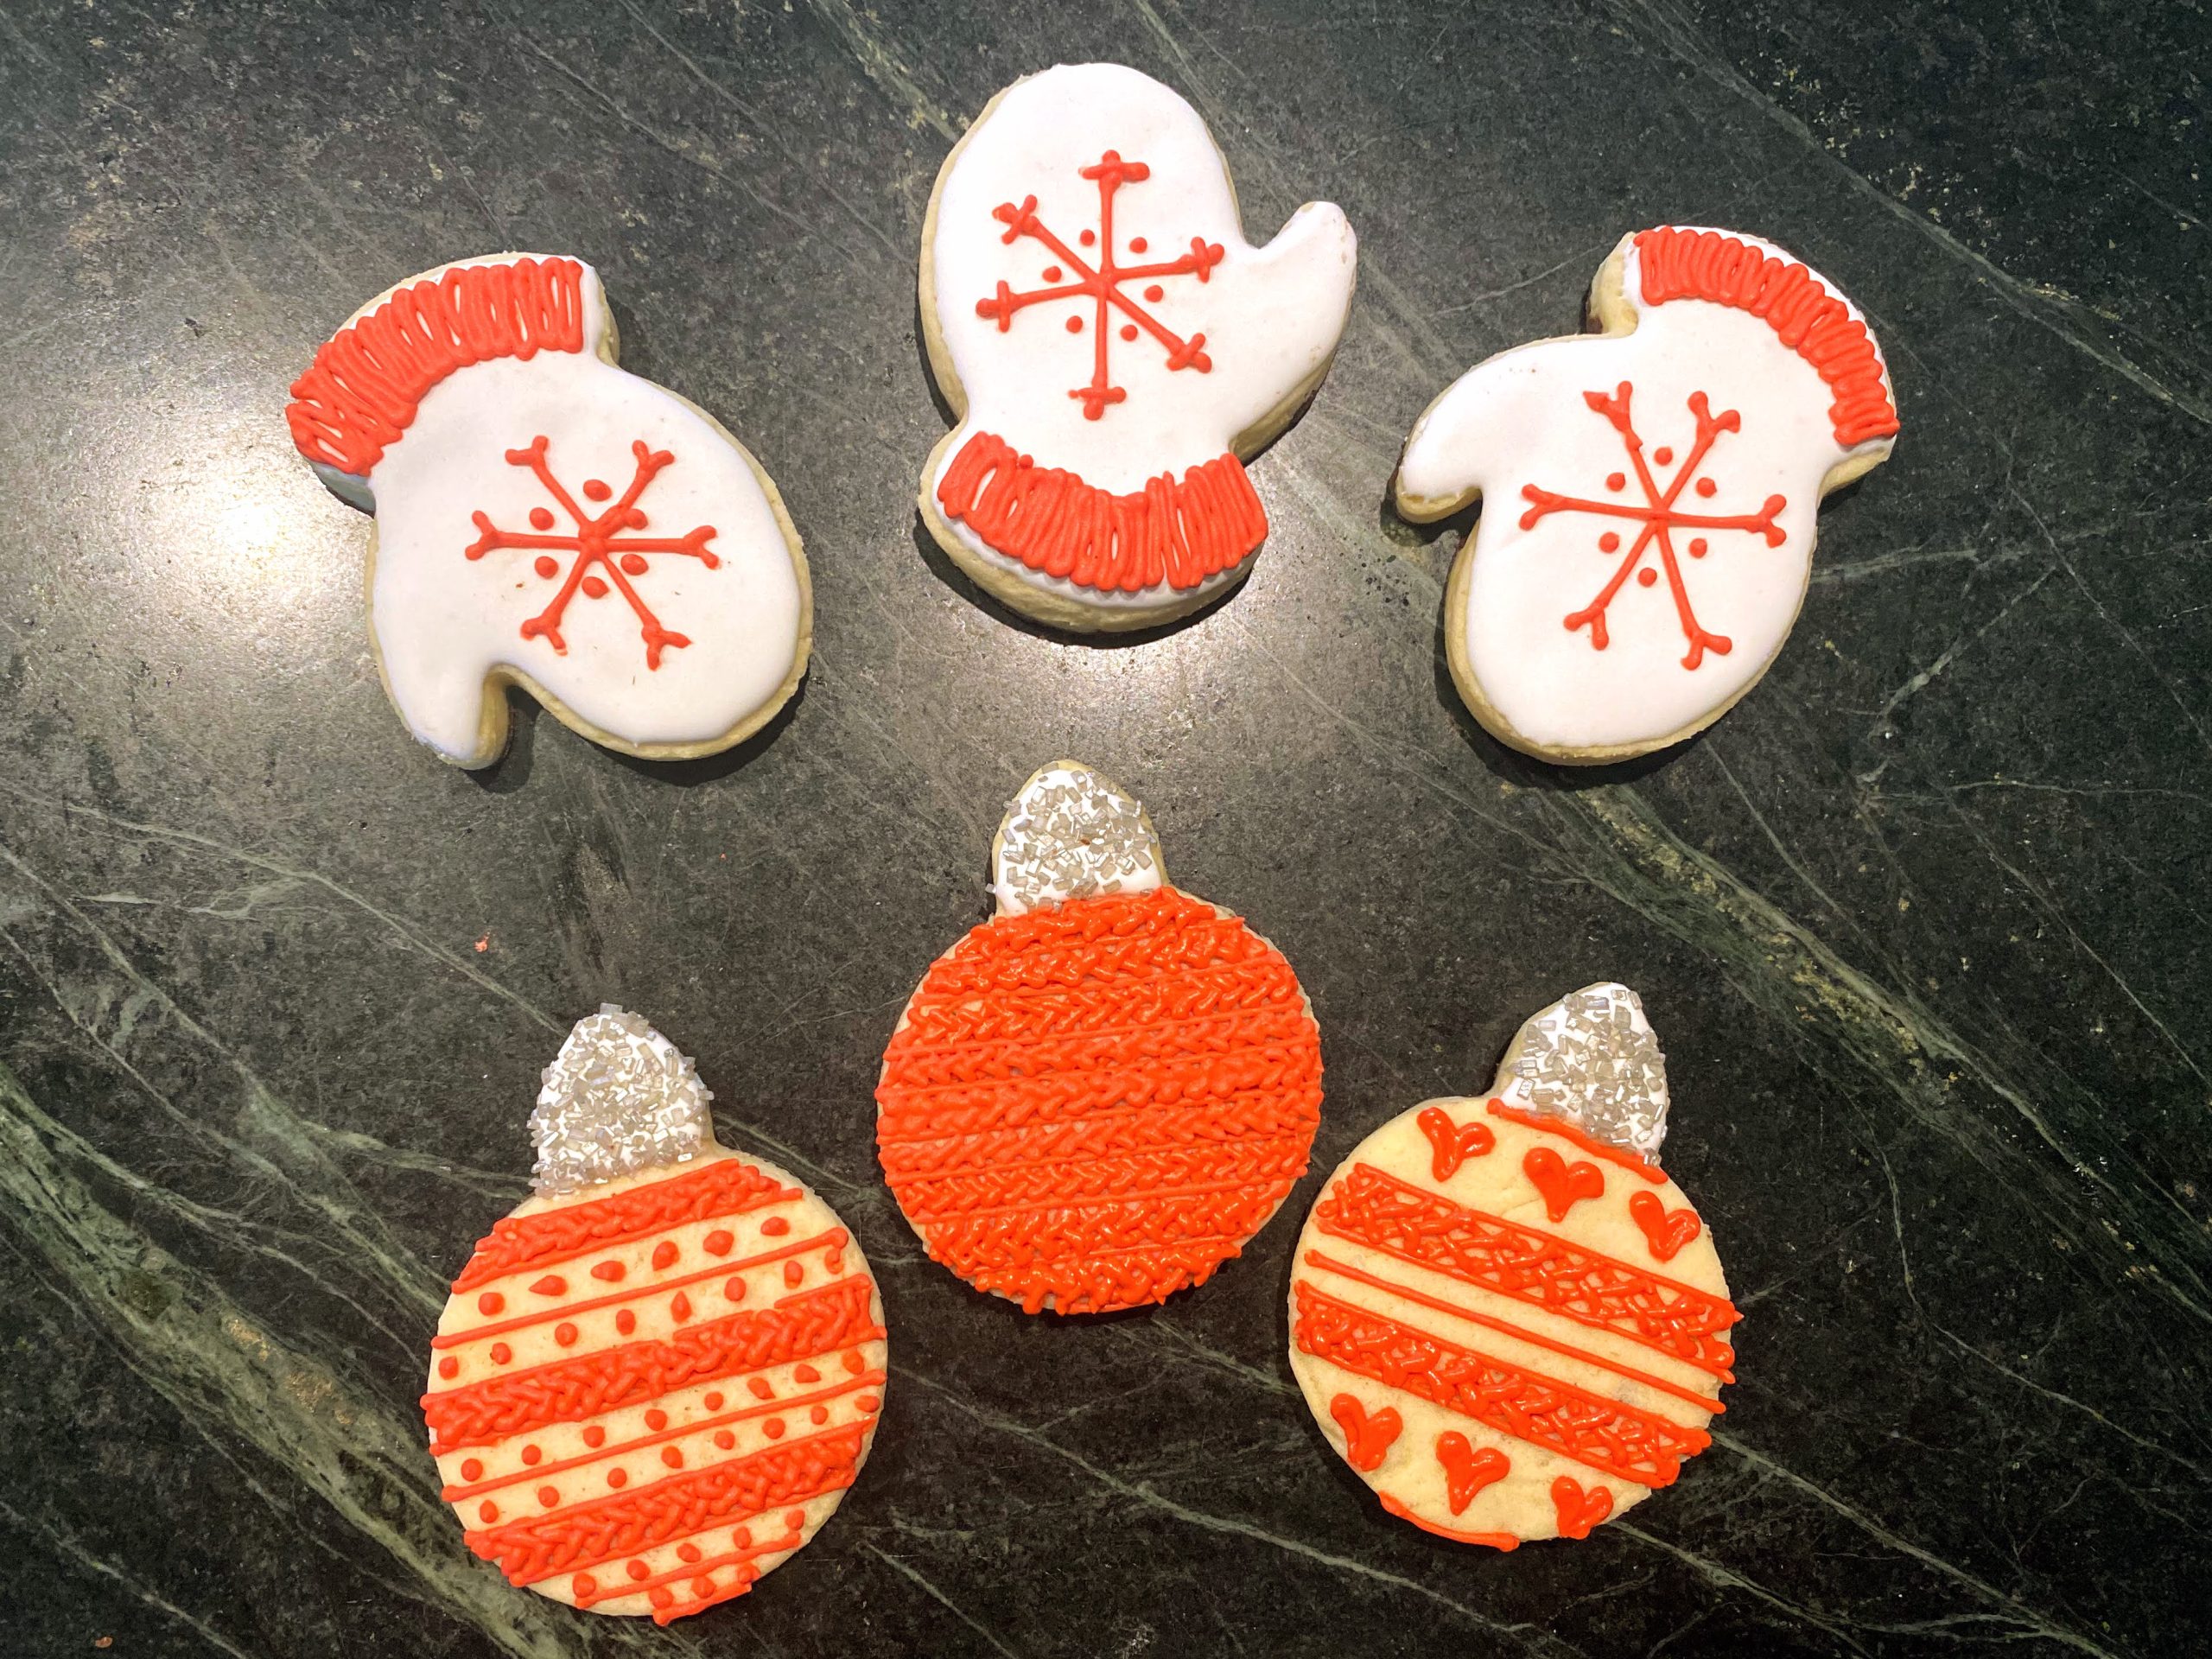 Sugar cookie decorating tips to make adorable holiday cookies with the family. Includes recipes, decorating ideas, and much more. Great information for beginners!